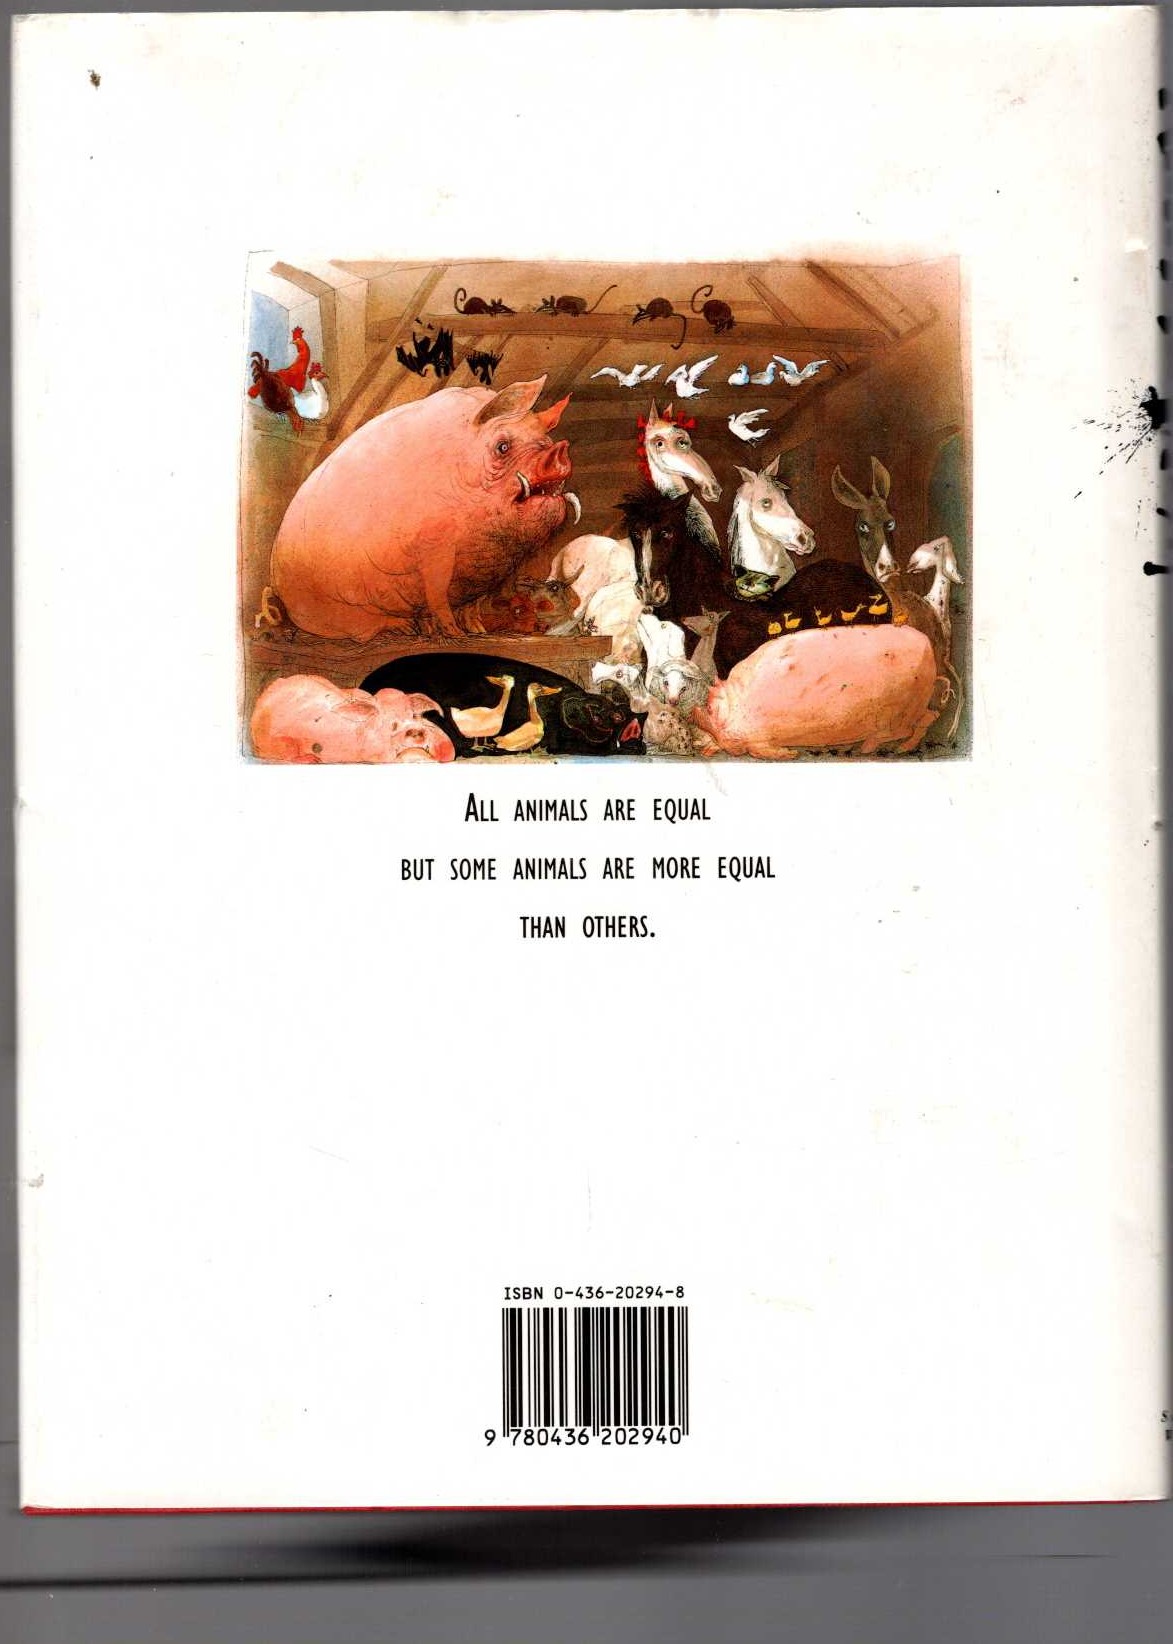 ANIMAL FARM (illustrated by Ralph Steadman) magnified rear book cover image